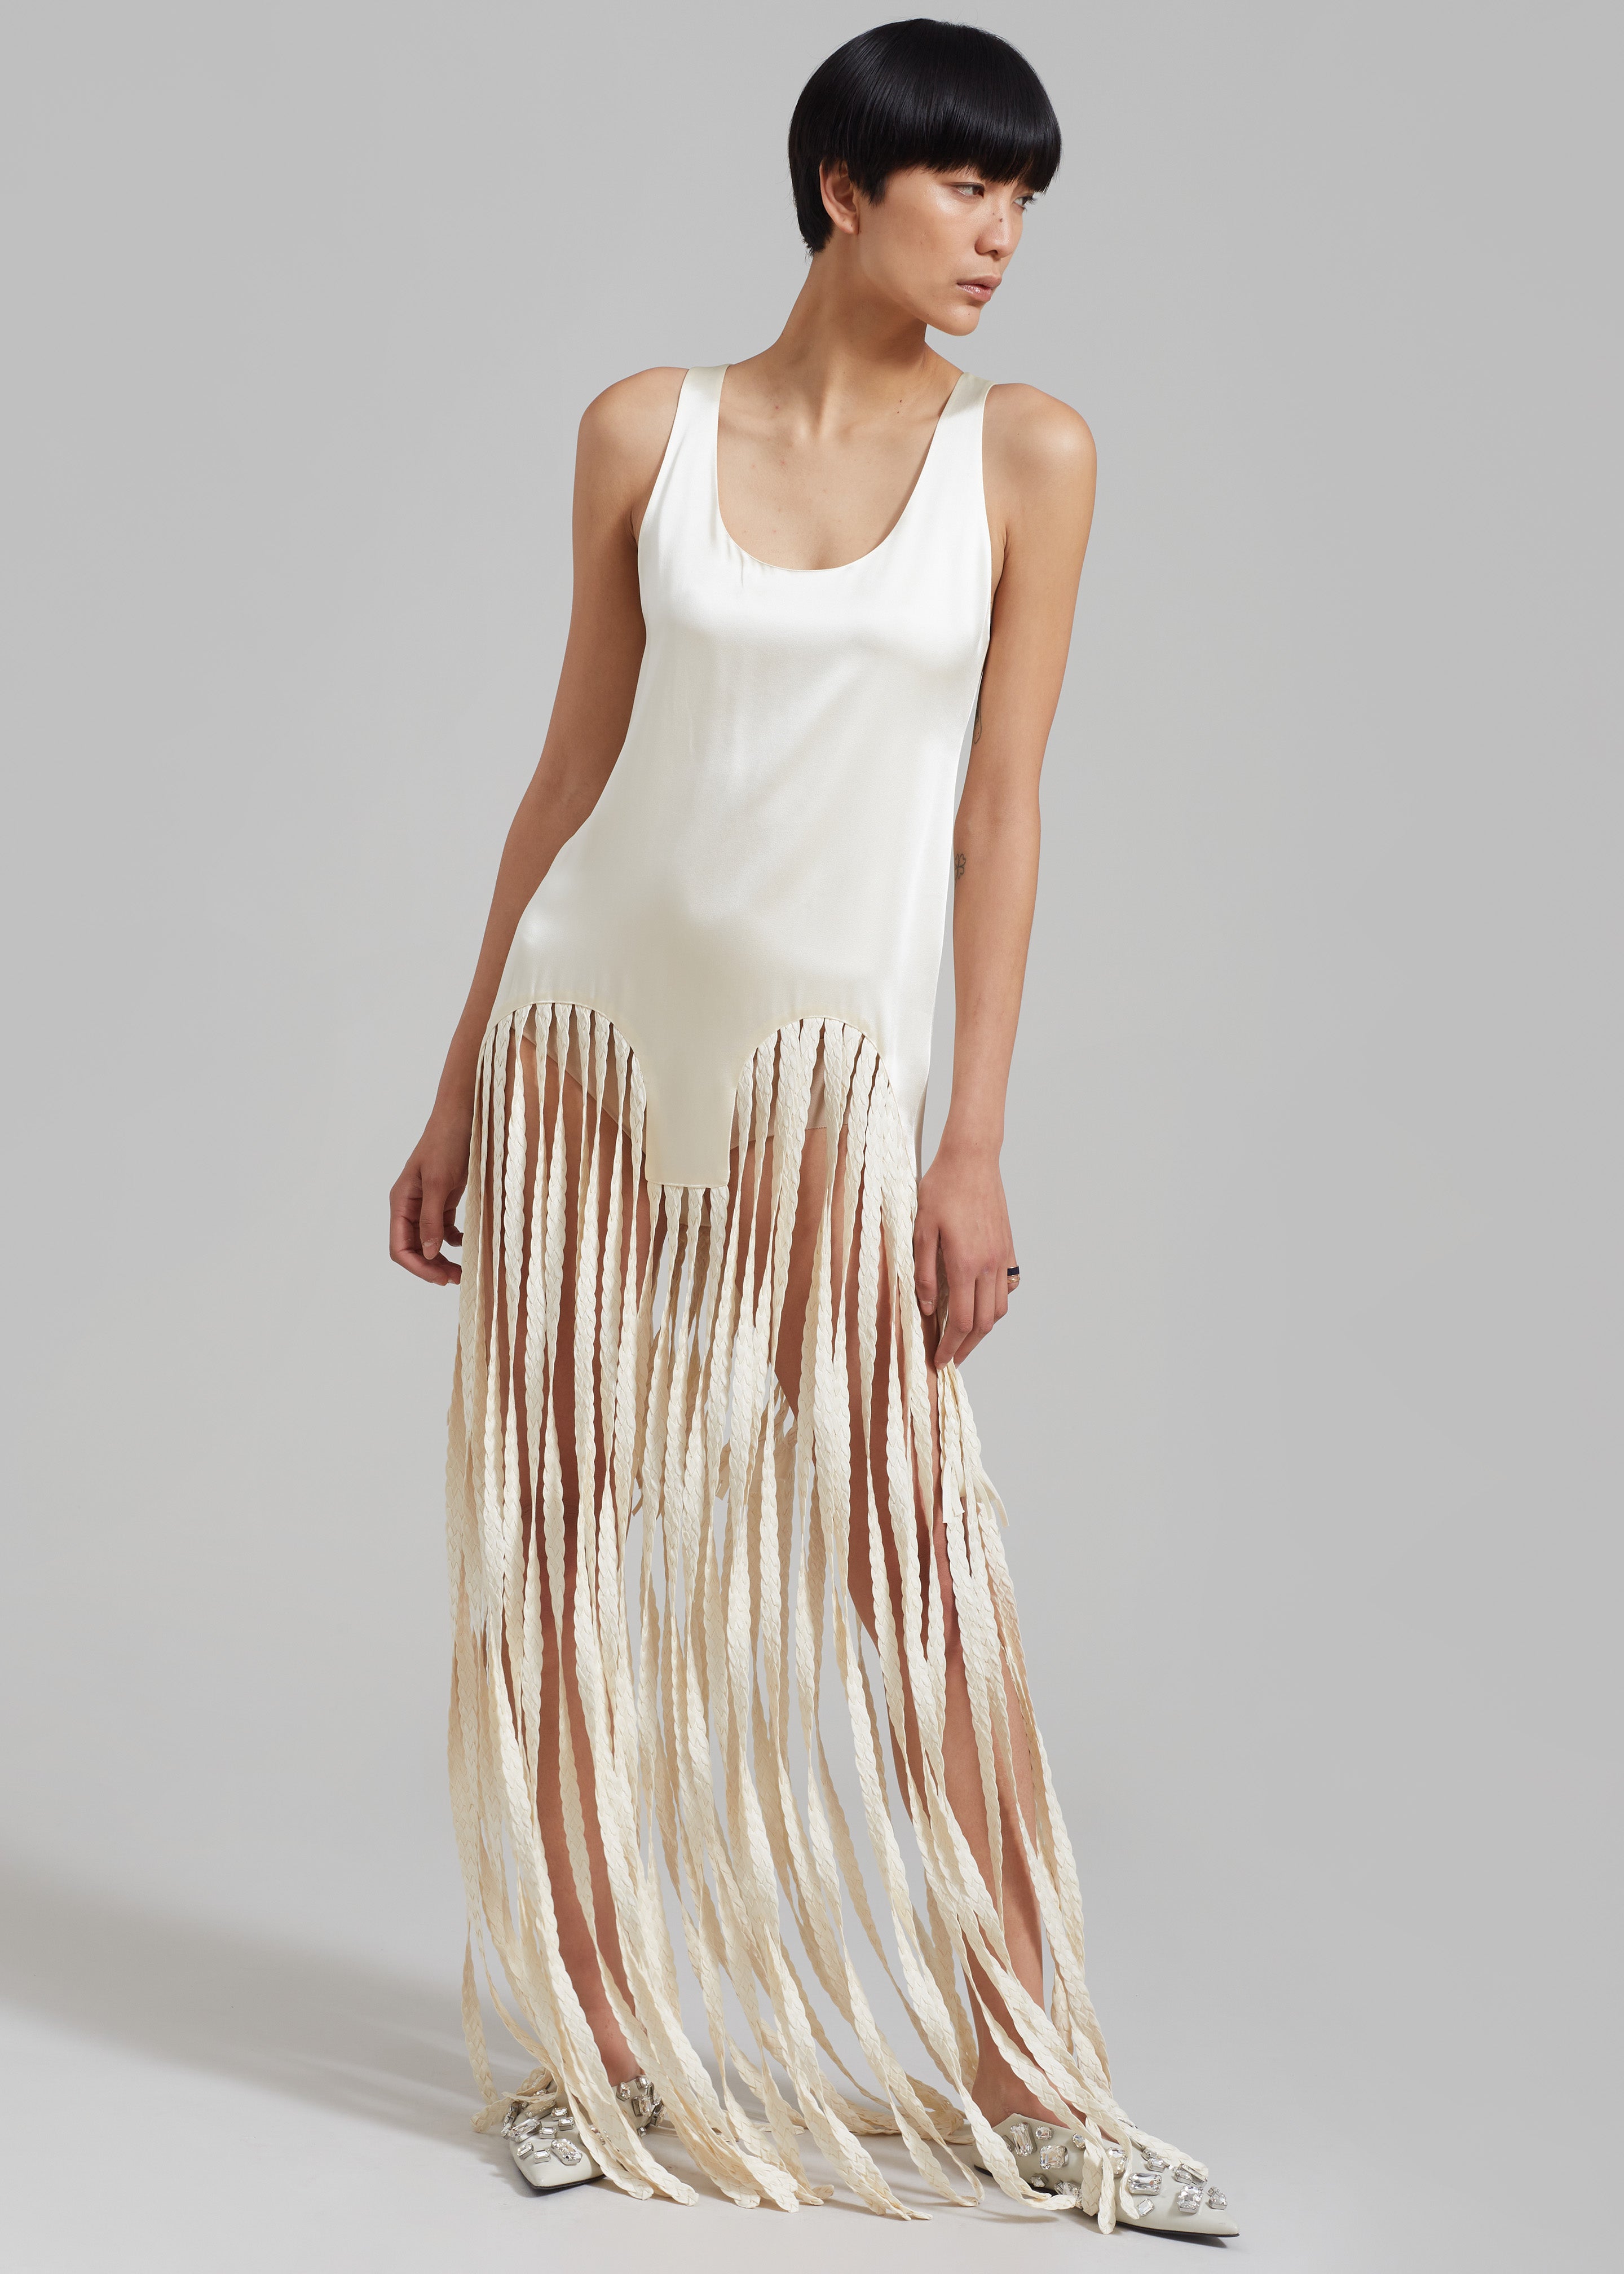 Bevza Long Spikelet Dress - Champagne - 6